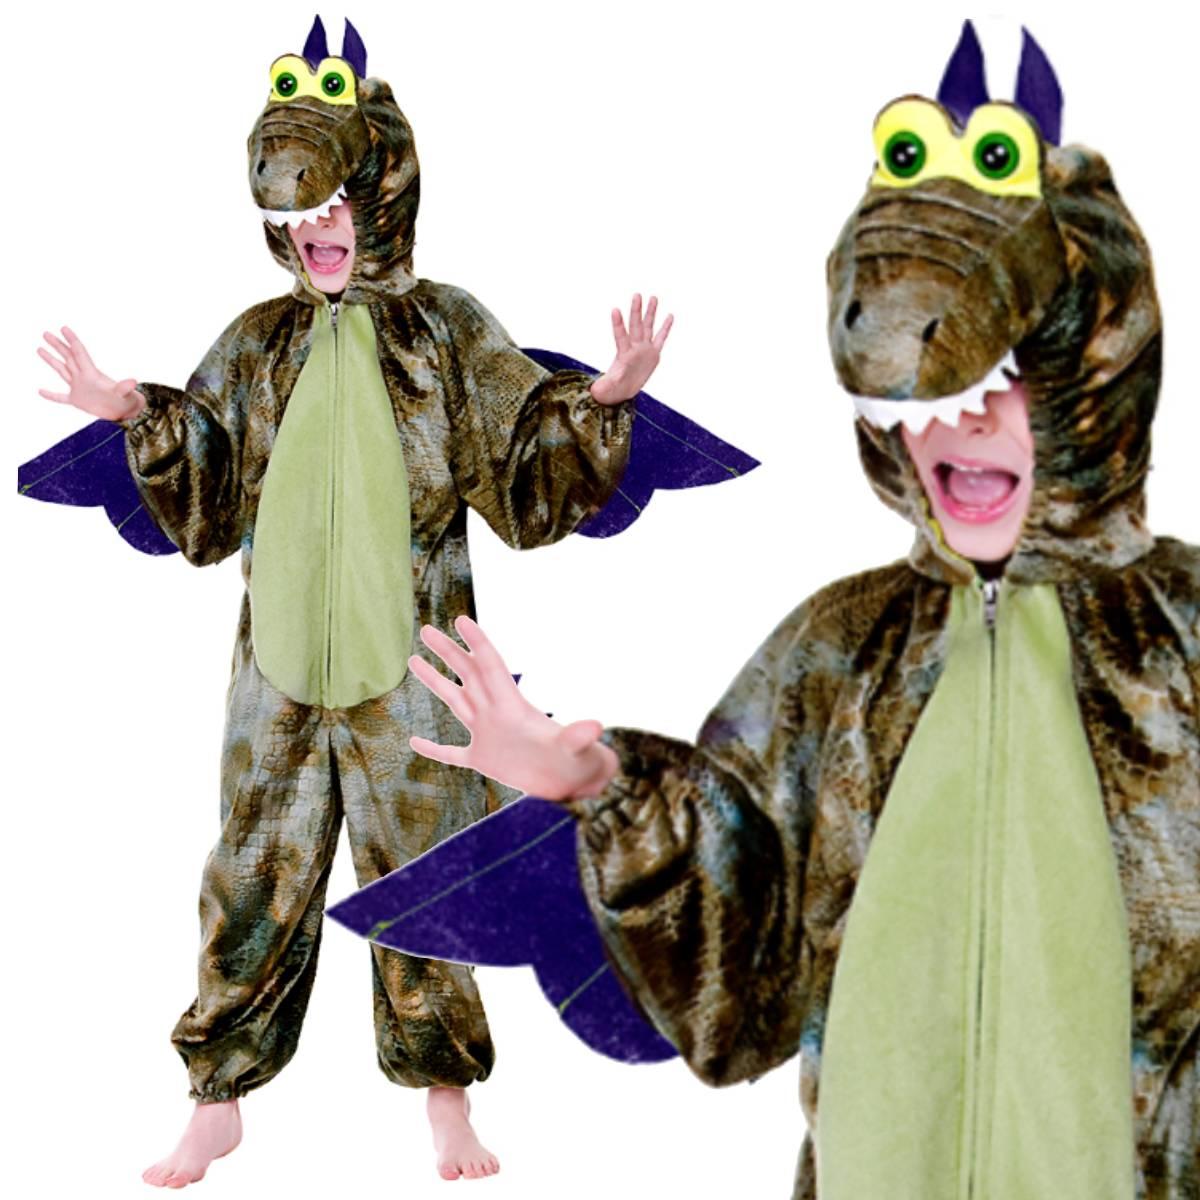 Exciting Jurassic Park inspired kid's Dinosaur Fancy Dress Costume by Wicked KA-4429 available here at Karnival Costumes online party shop